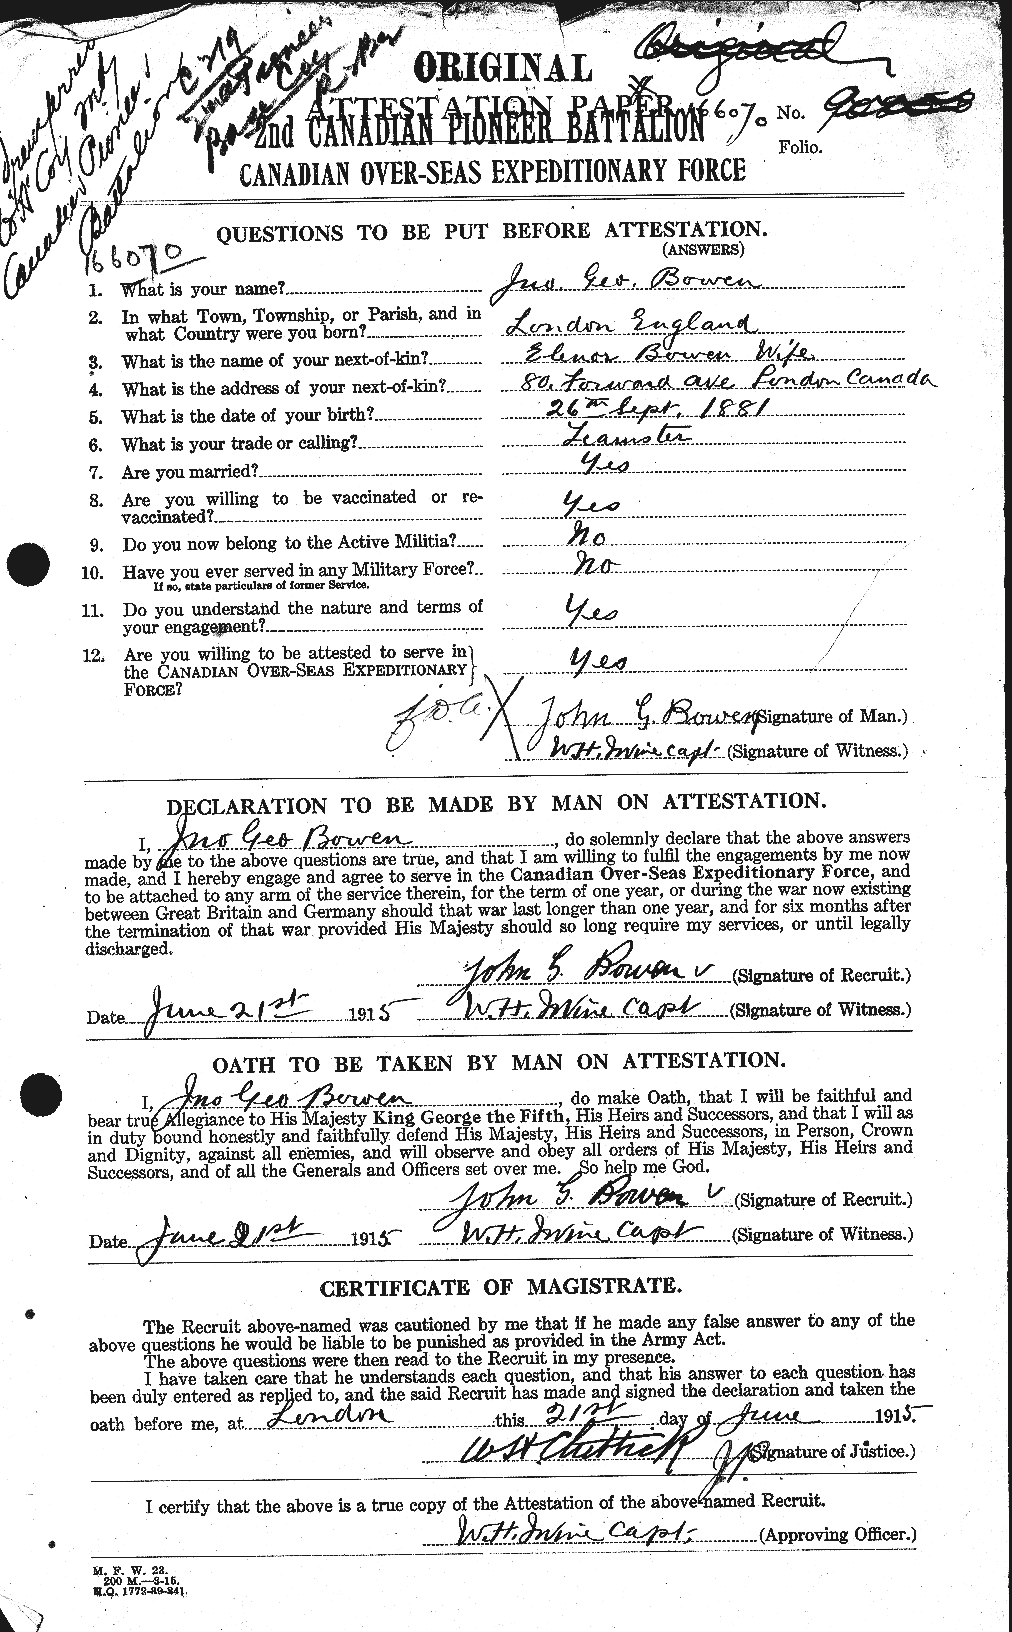 Personnel Records of the First World War - CEF 255438a